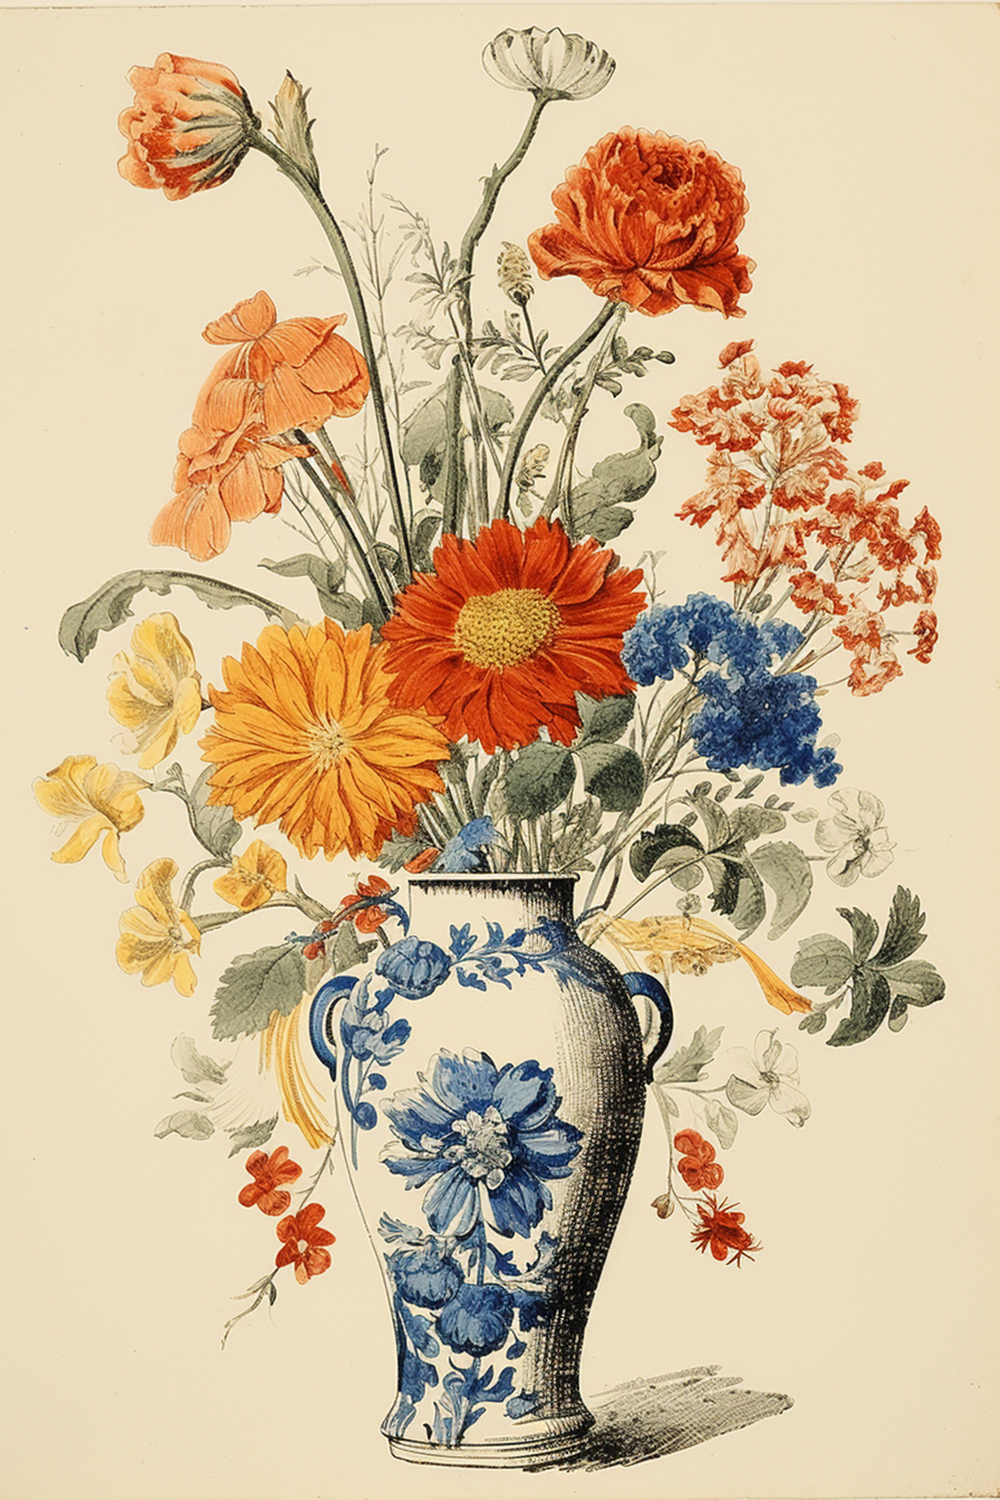 Blue vase with flowers